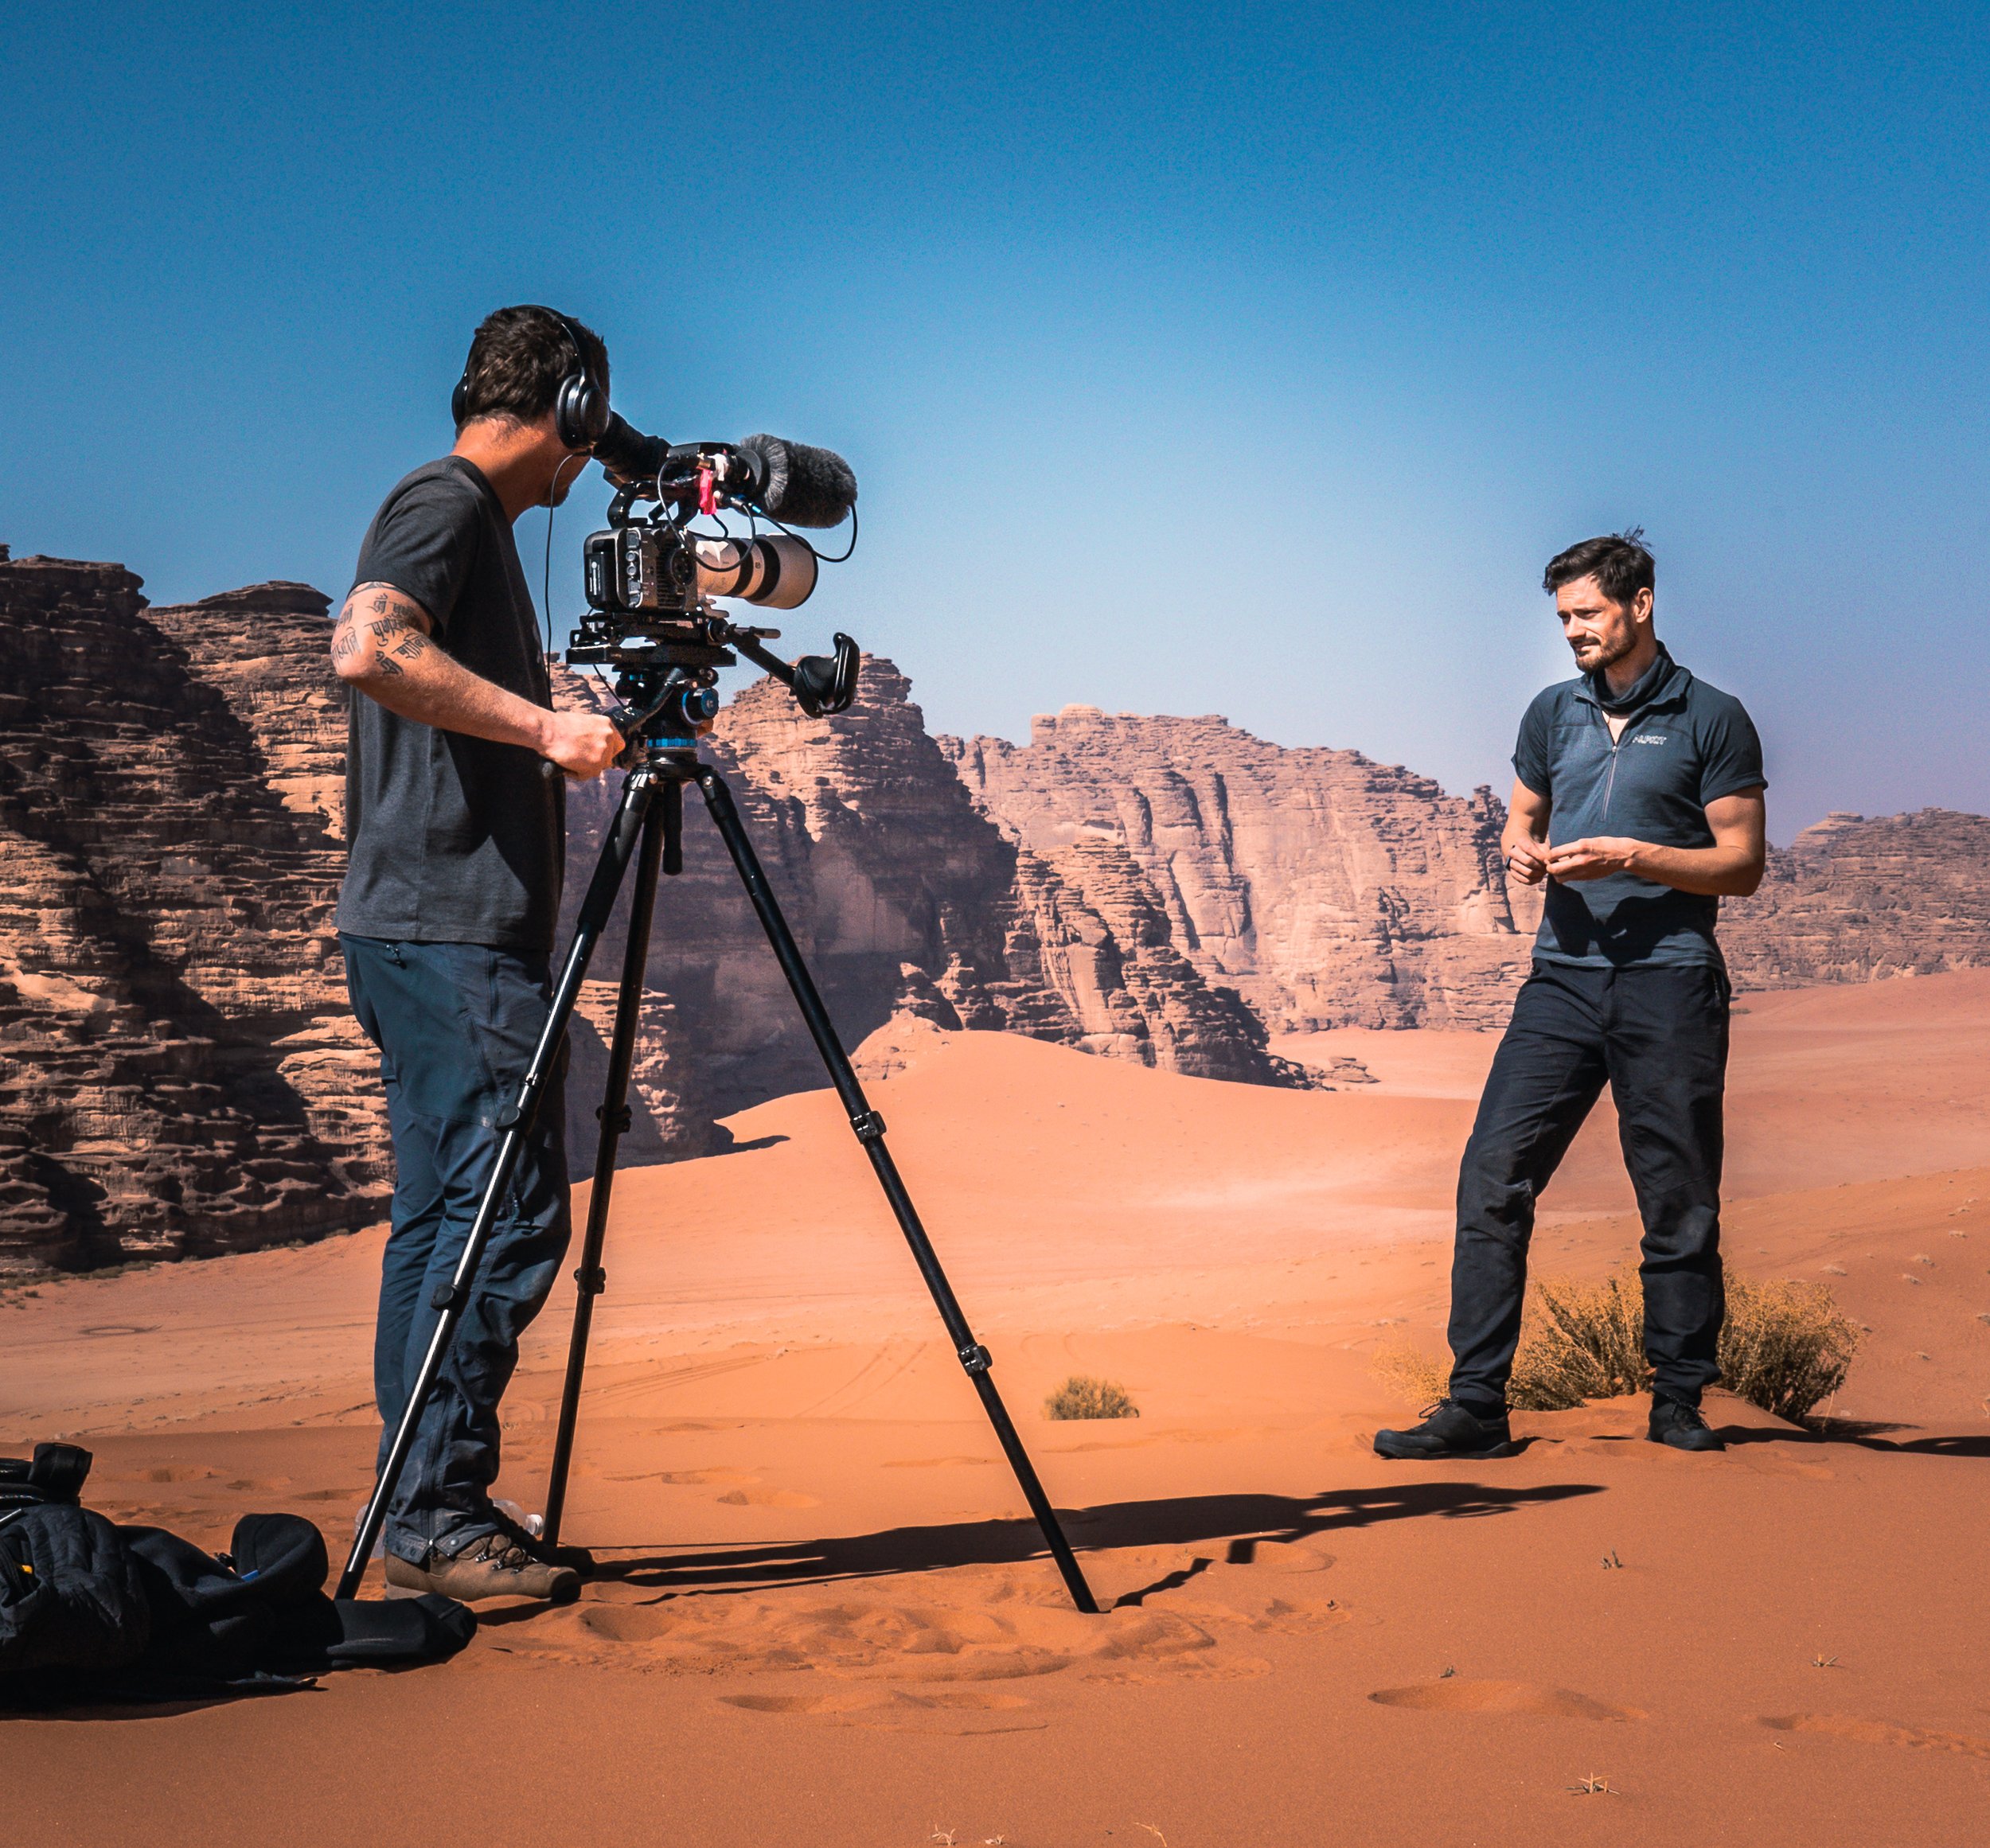 Filming in the heart off the Saudi desert